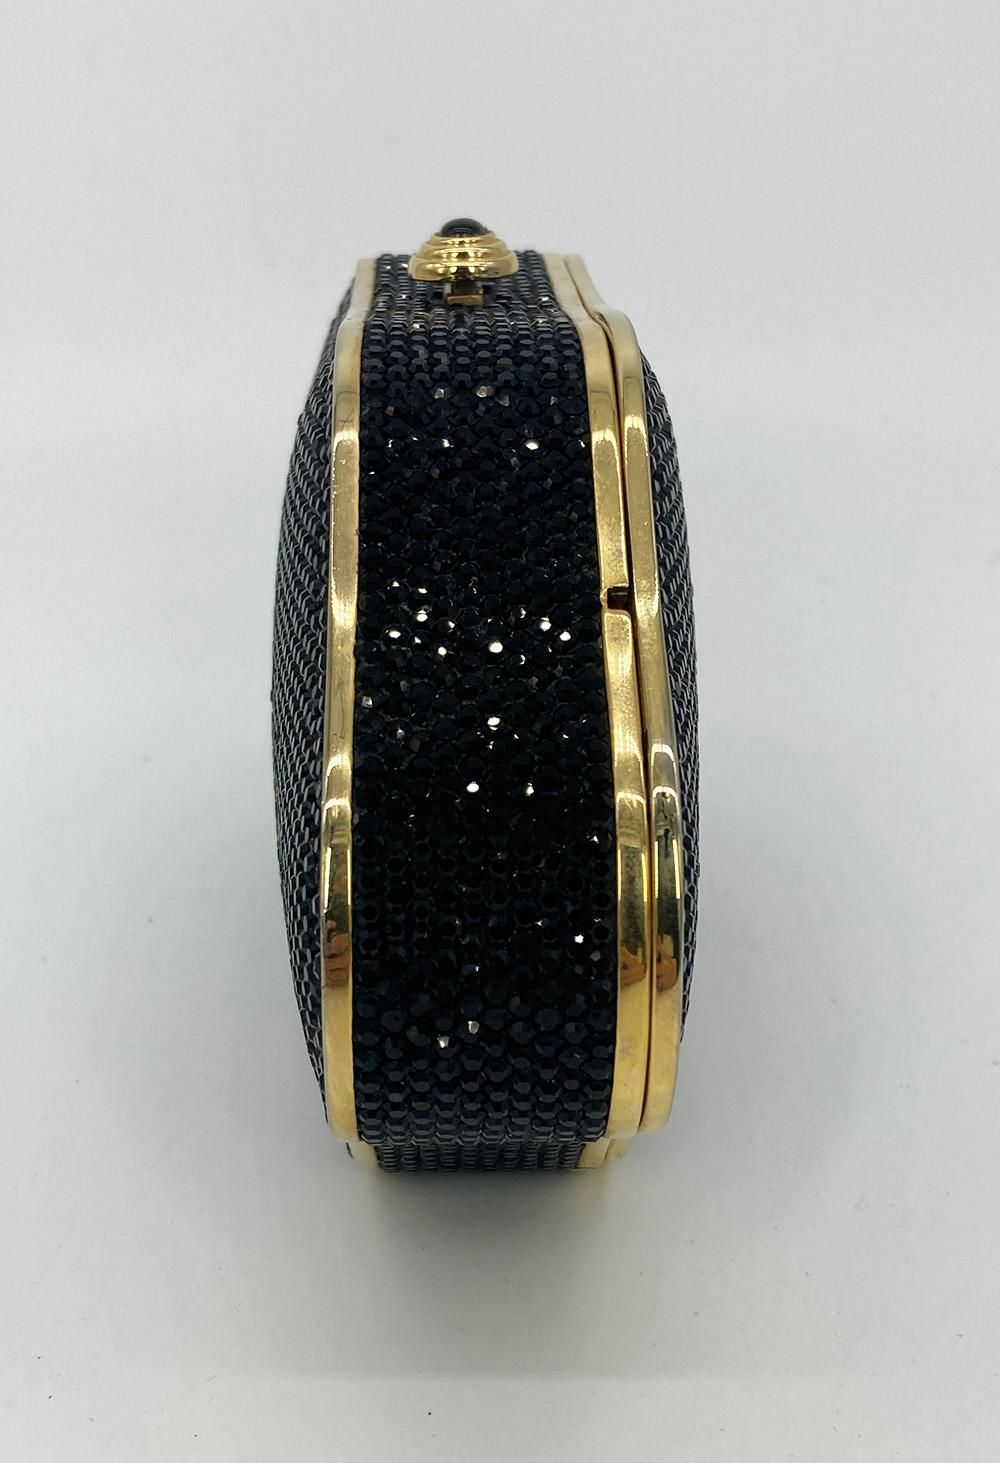 Judith Leiber Black Crystal Large Minaudiere in very good condition. Black swarovski crystal exterior trimmed with gold hardware in a unique large trapezoid shape. Top button closure opens to a gold leather interior with attached gold chain shoulder